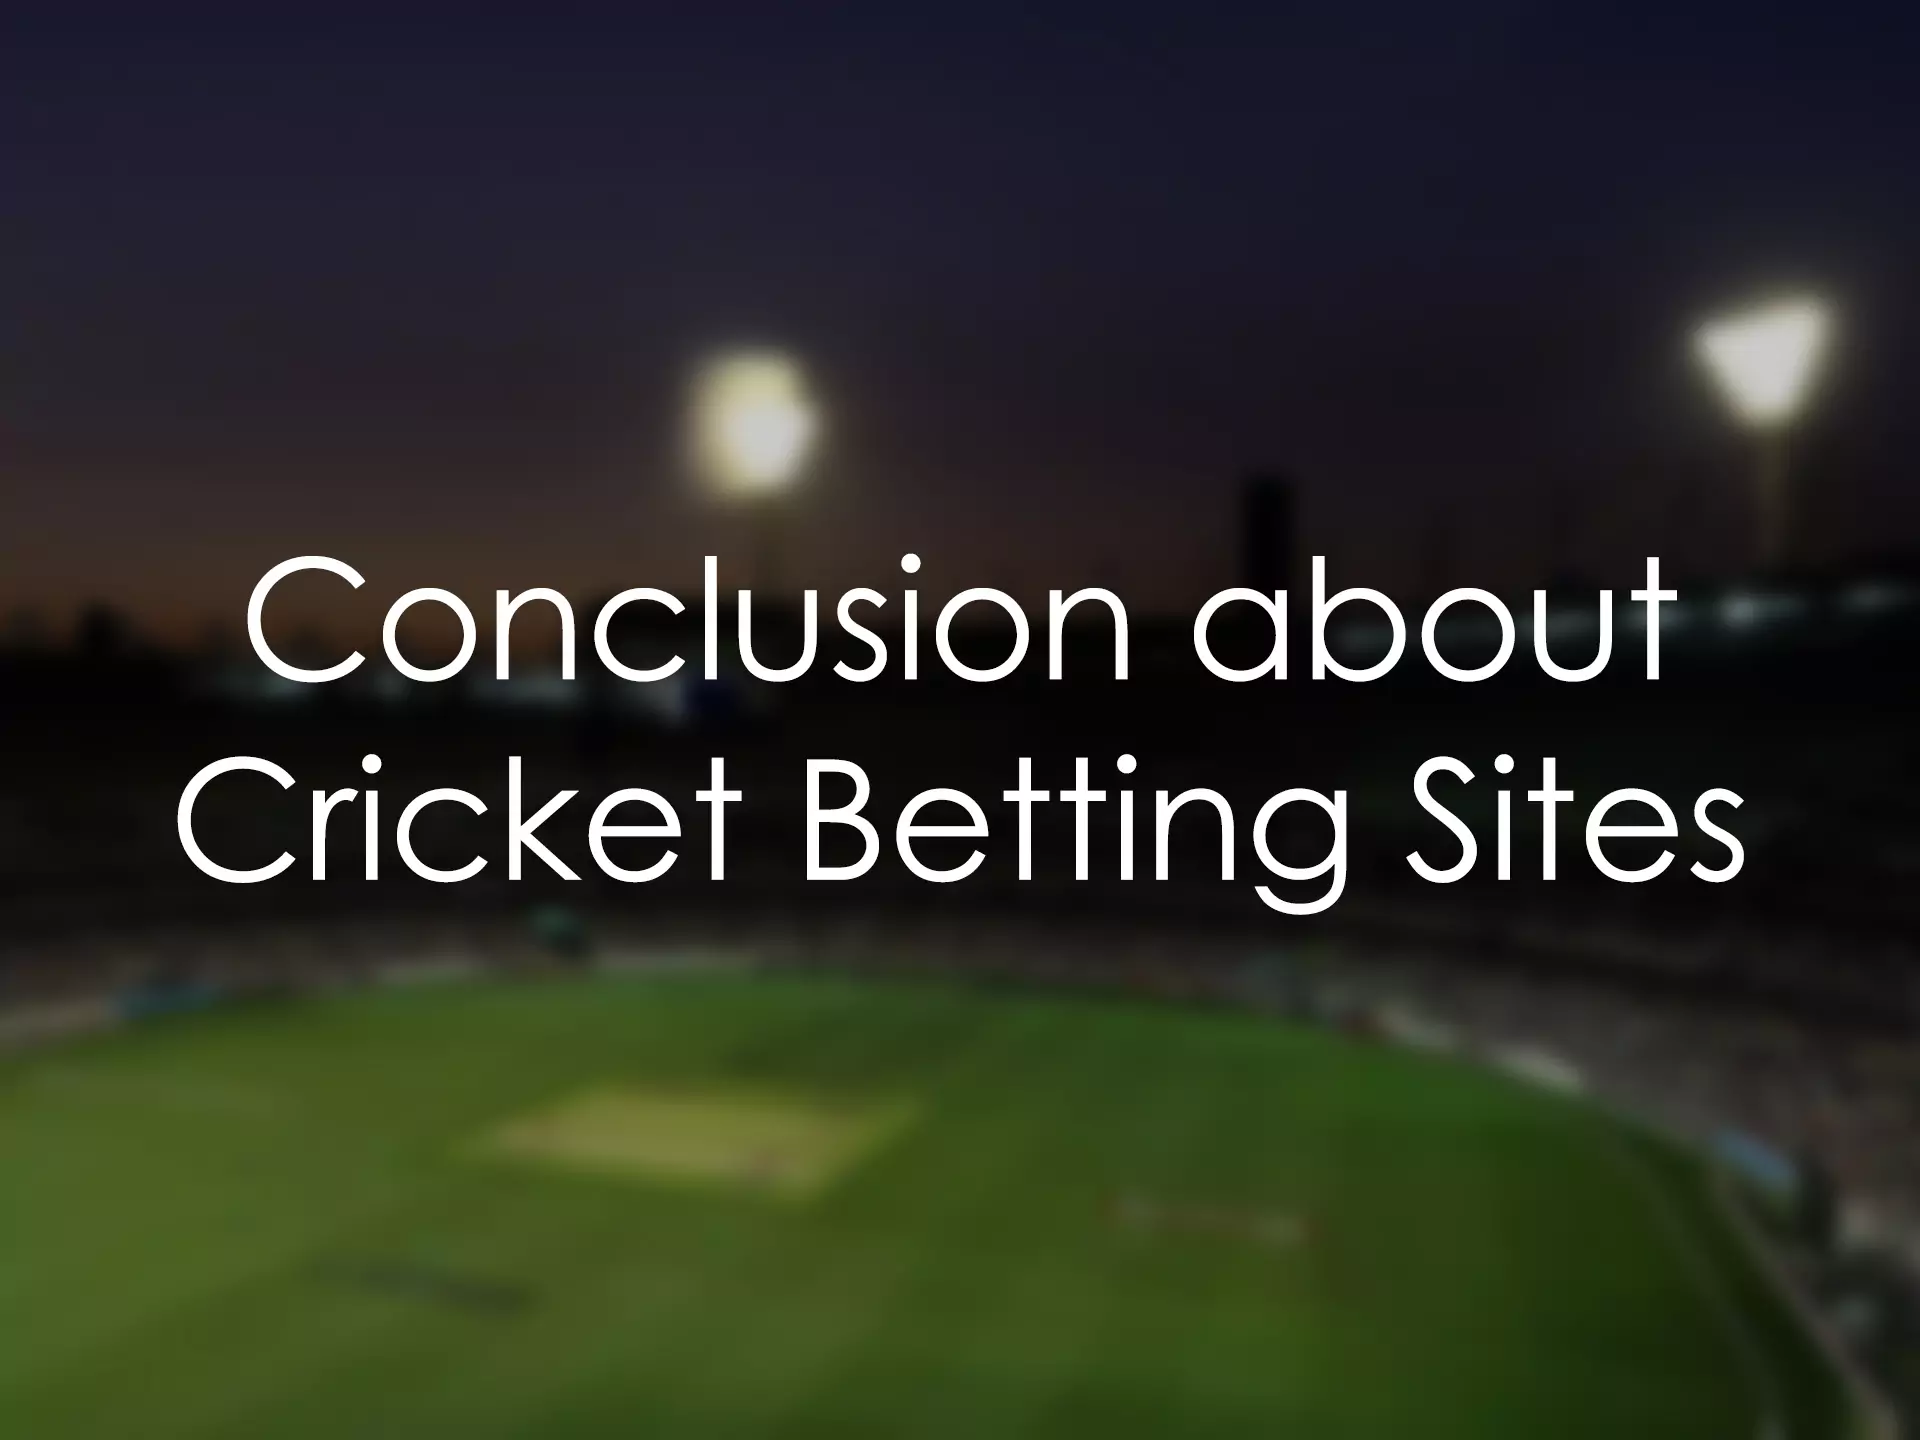 Our guide will help Indian users choose reliable cricket betting sites.